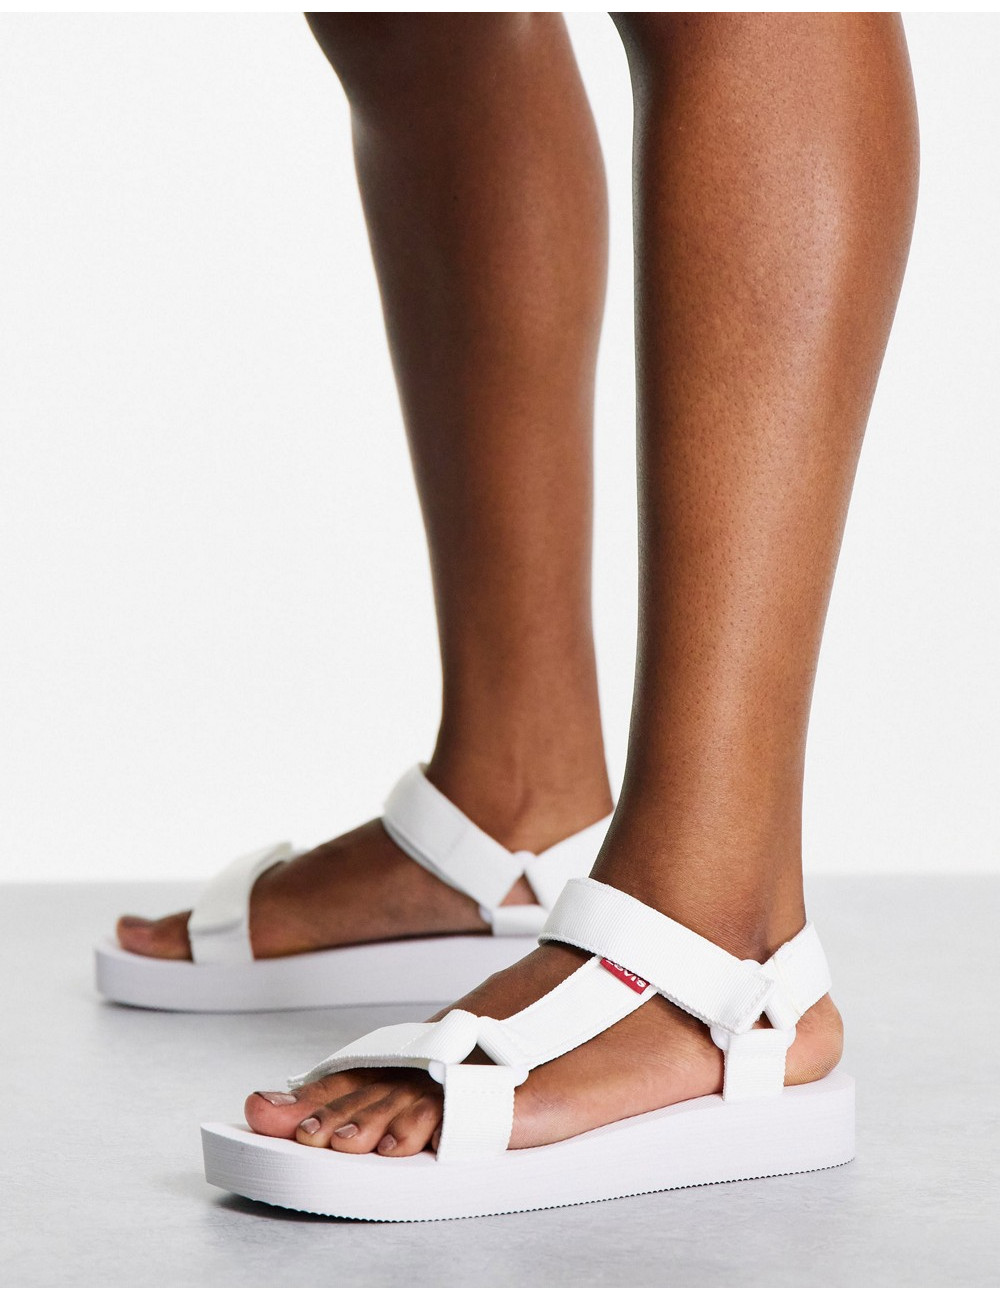 Levi's sandals in white